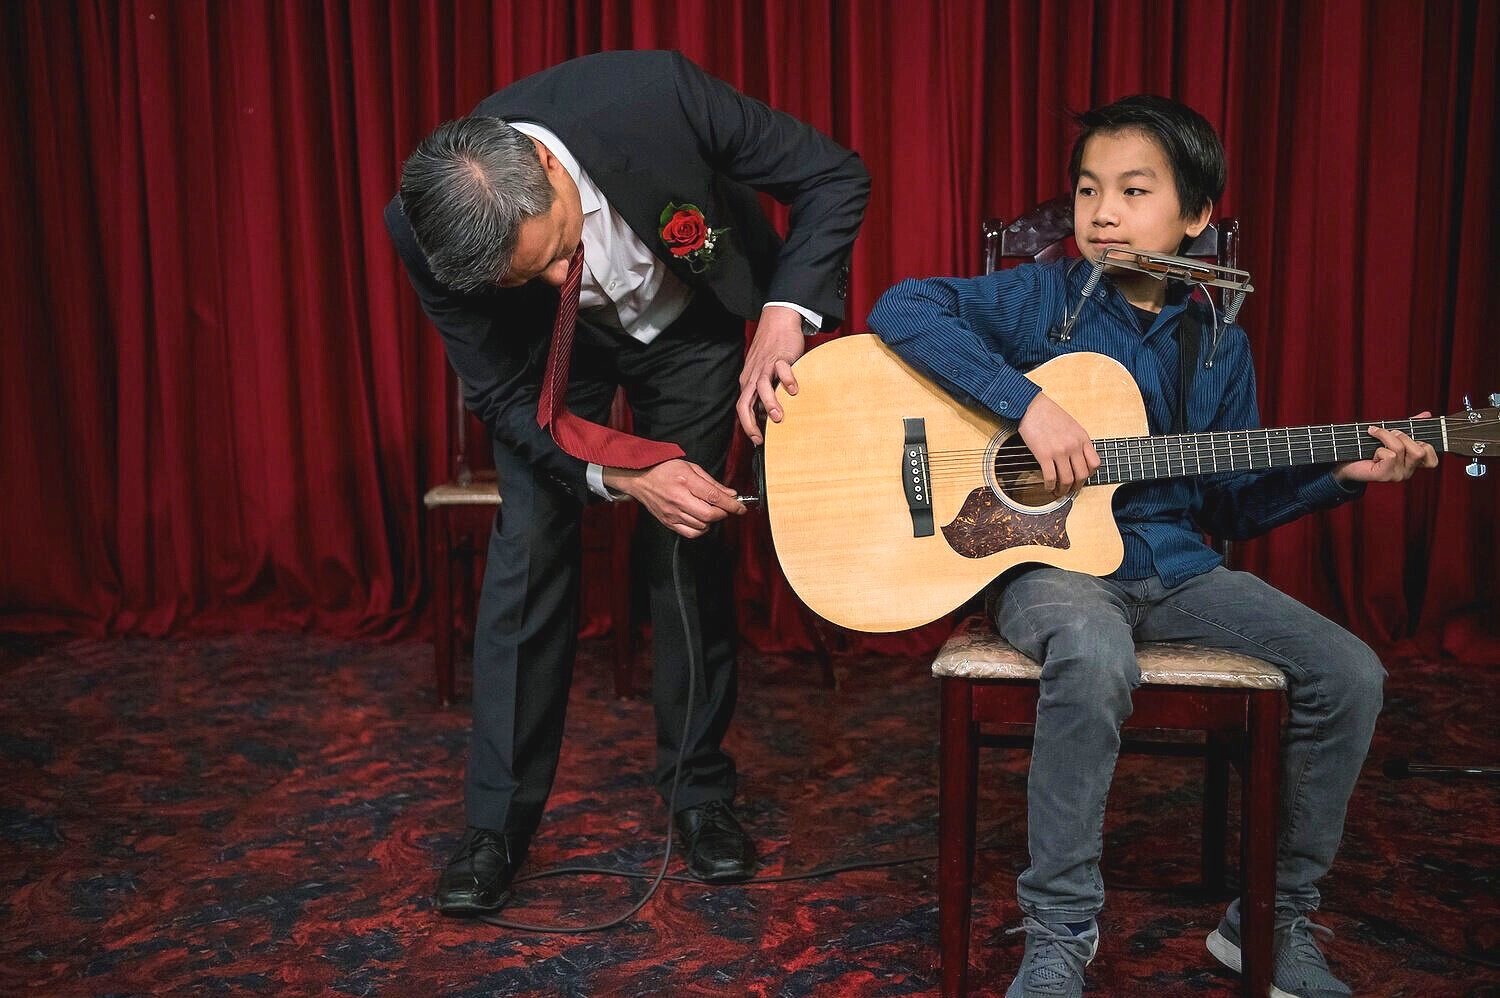  James Yee checks his son’s guitar before his performance of Bohemian Rhapsody by Queen during a family event. The young generation of Chinese Canadians are increasingly exposed and influenced by western culture. Therefore, more young Chinese study w